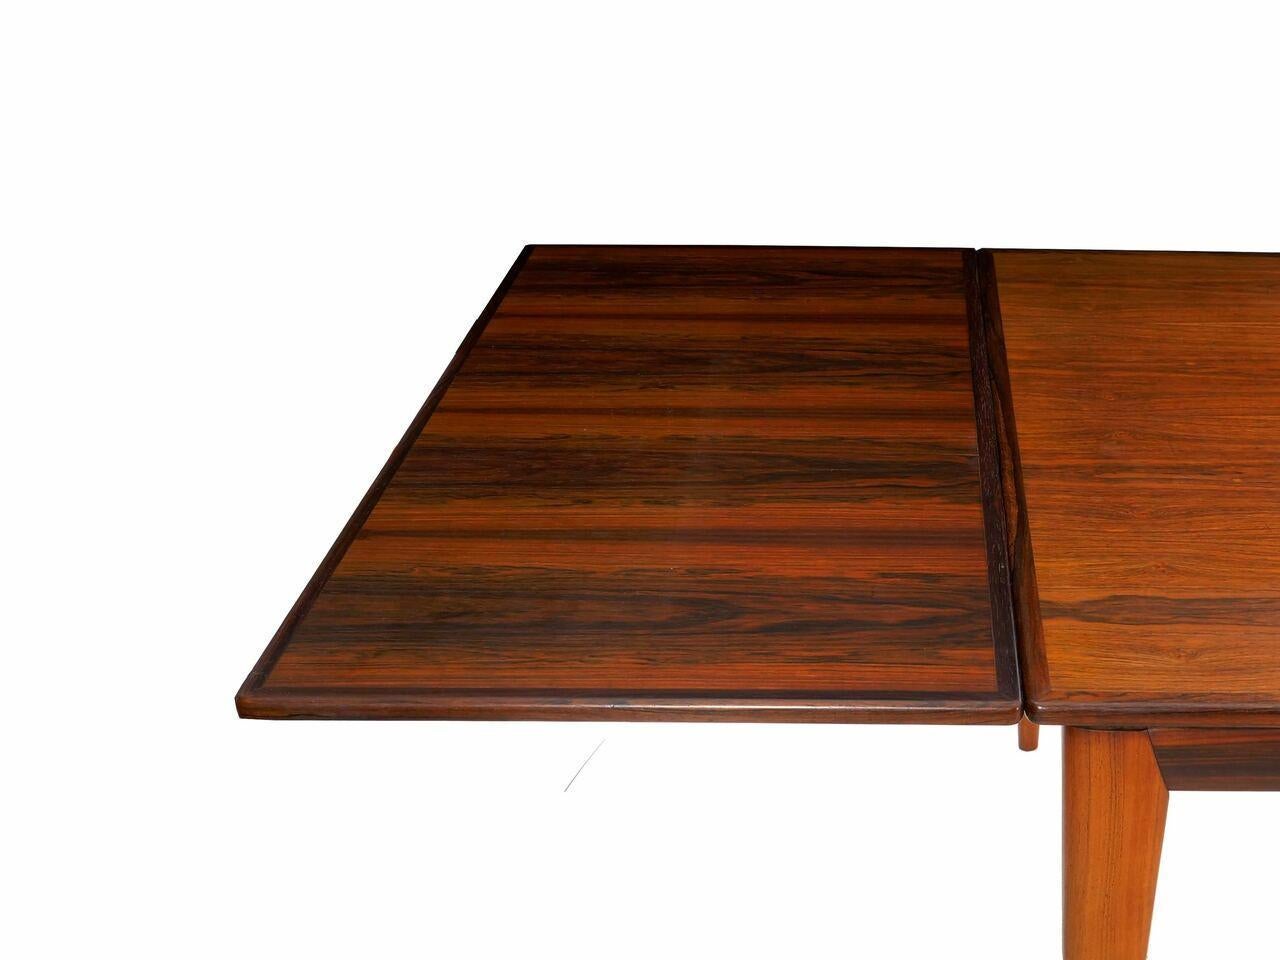 Danish Mid-Century Modern Rosewood Dining Table by Niels Møller, Model No. 254 7